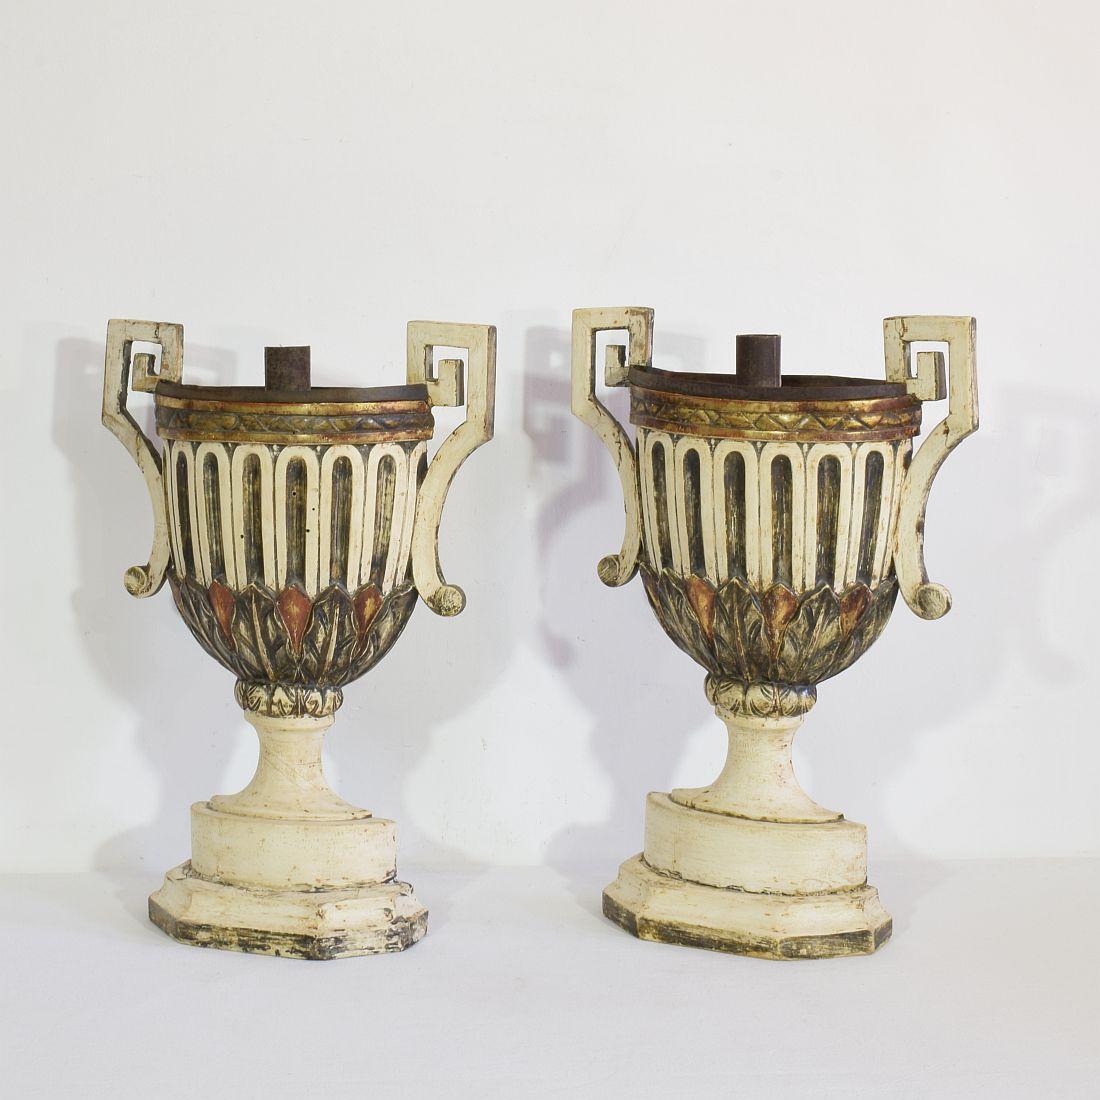 Hand-Crafted Pair of 18th Century Italian Neoclassical Altar Candleholders For Sale